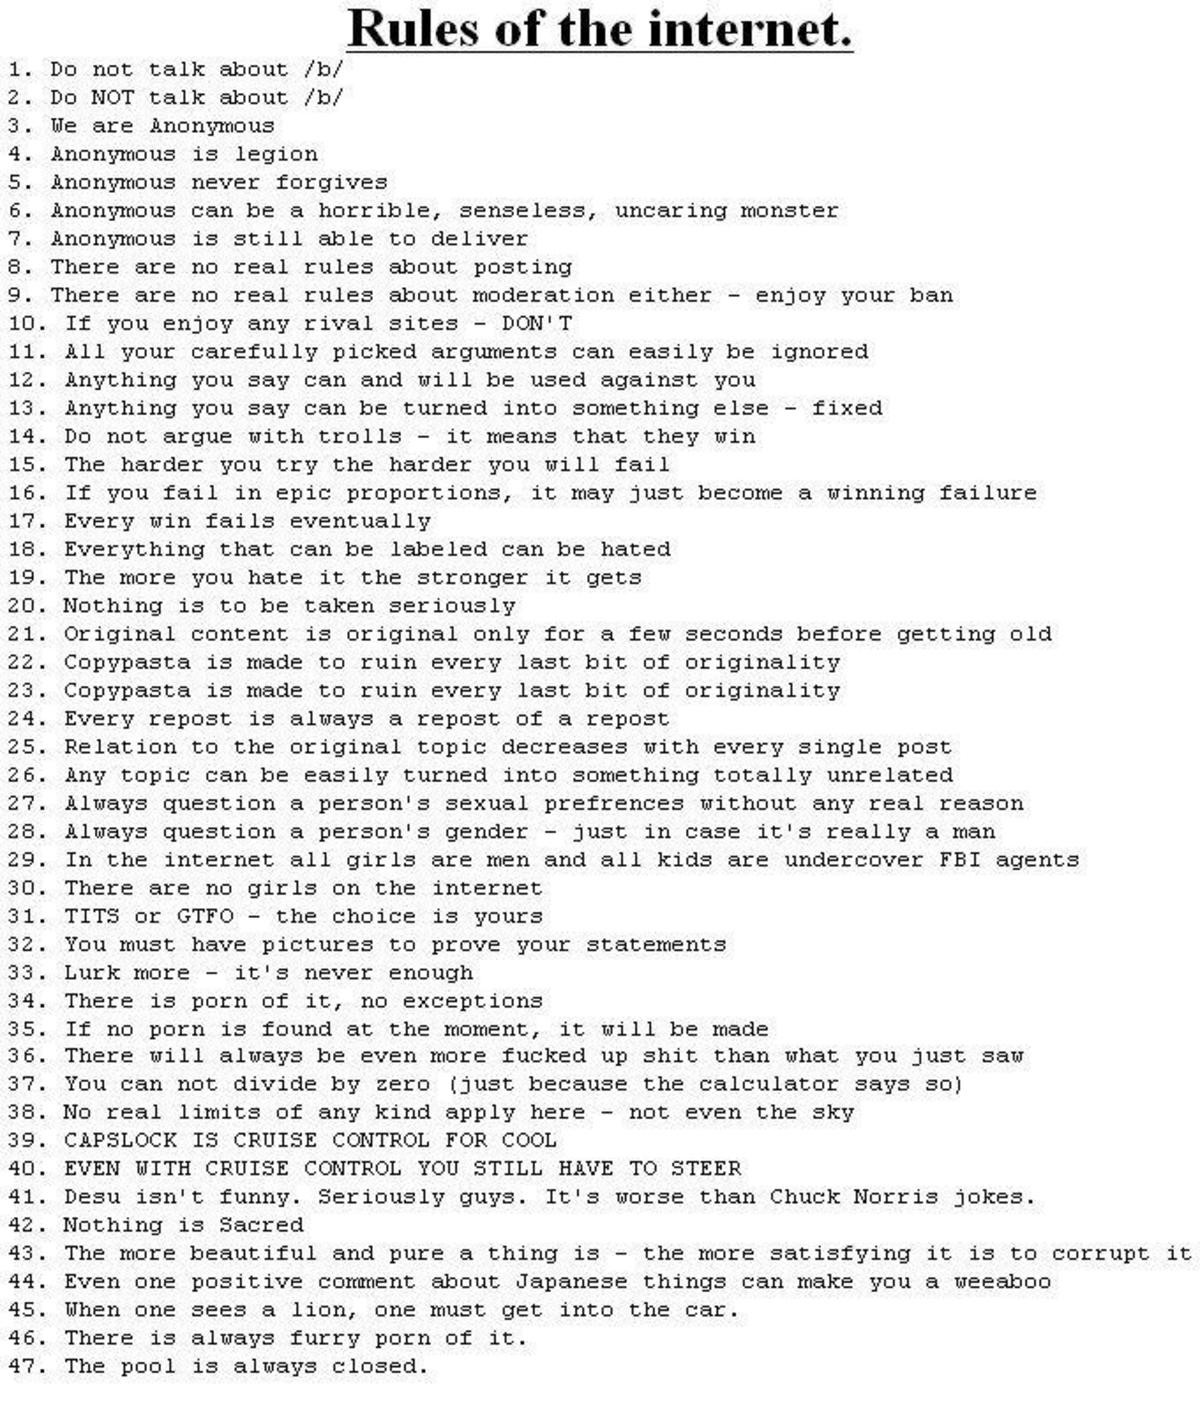 These are old now but most still hold true, especially rule 14,19. . Rules of the internet. Do not talk about /1: s/ no NOT talk about /h/ we are Anonymous Anon